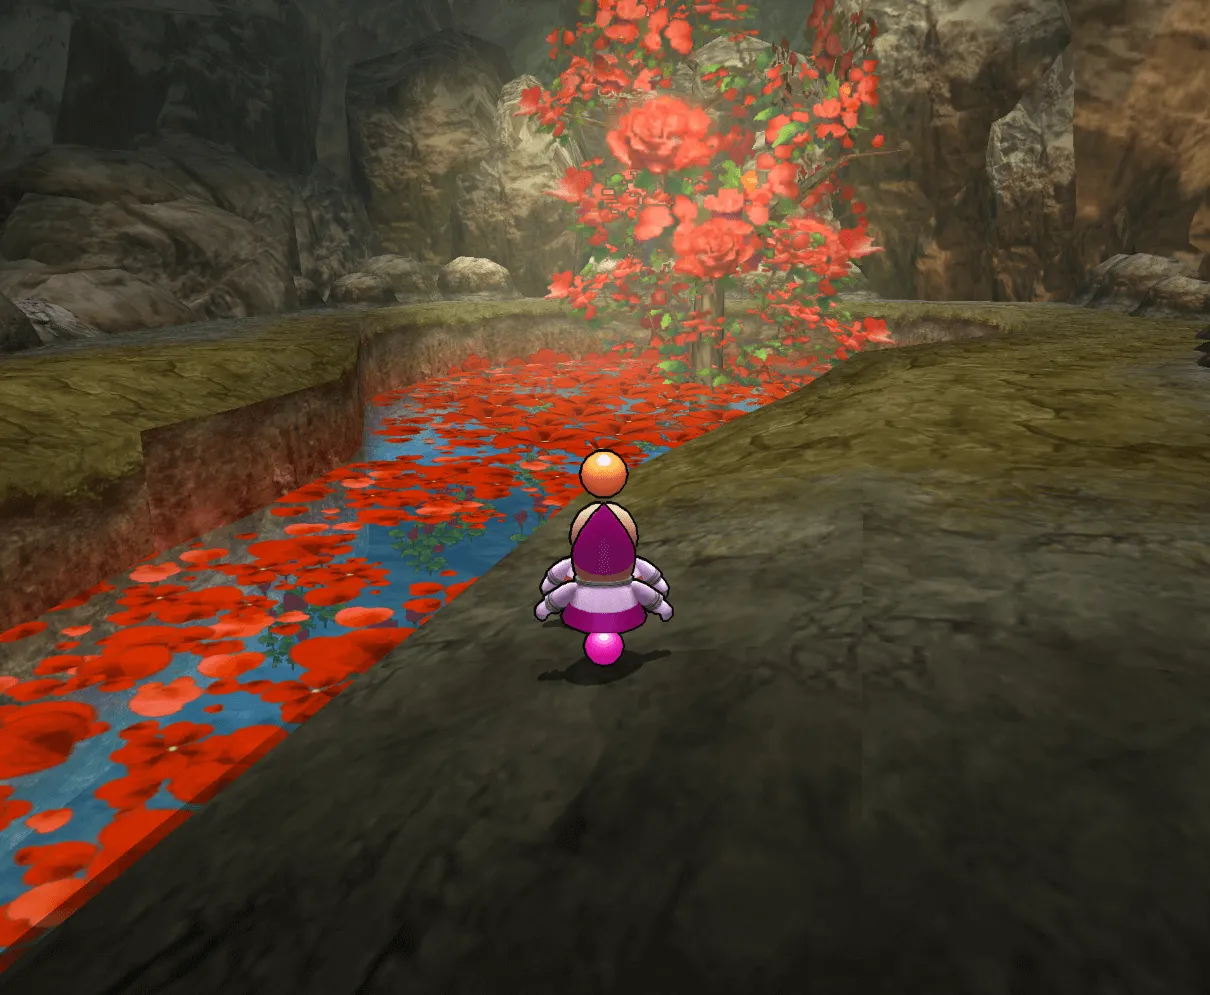 Opoona and Copoona standing in a cave full of red flowers.